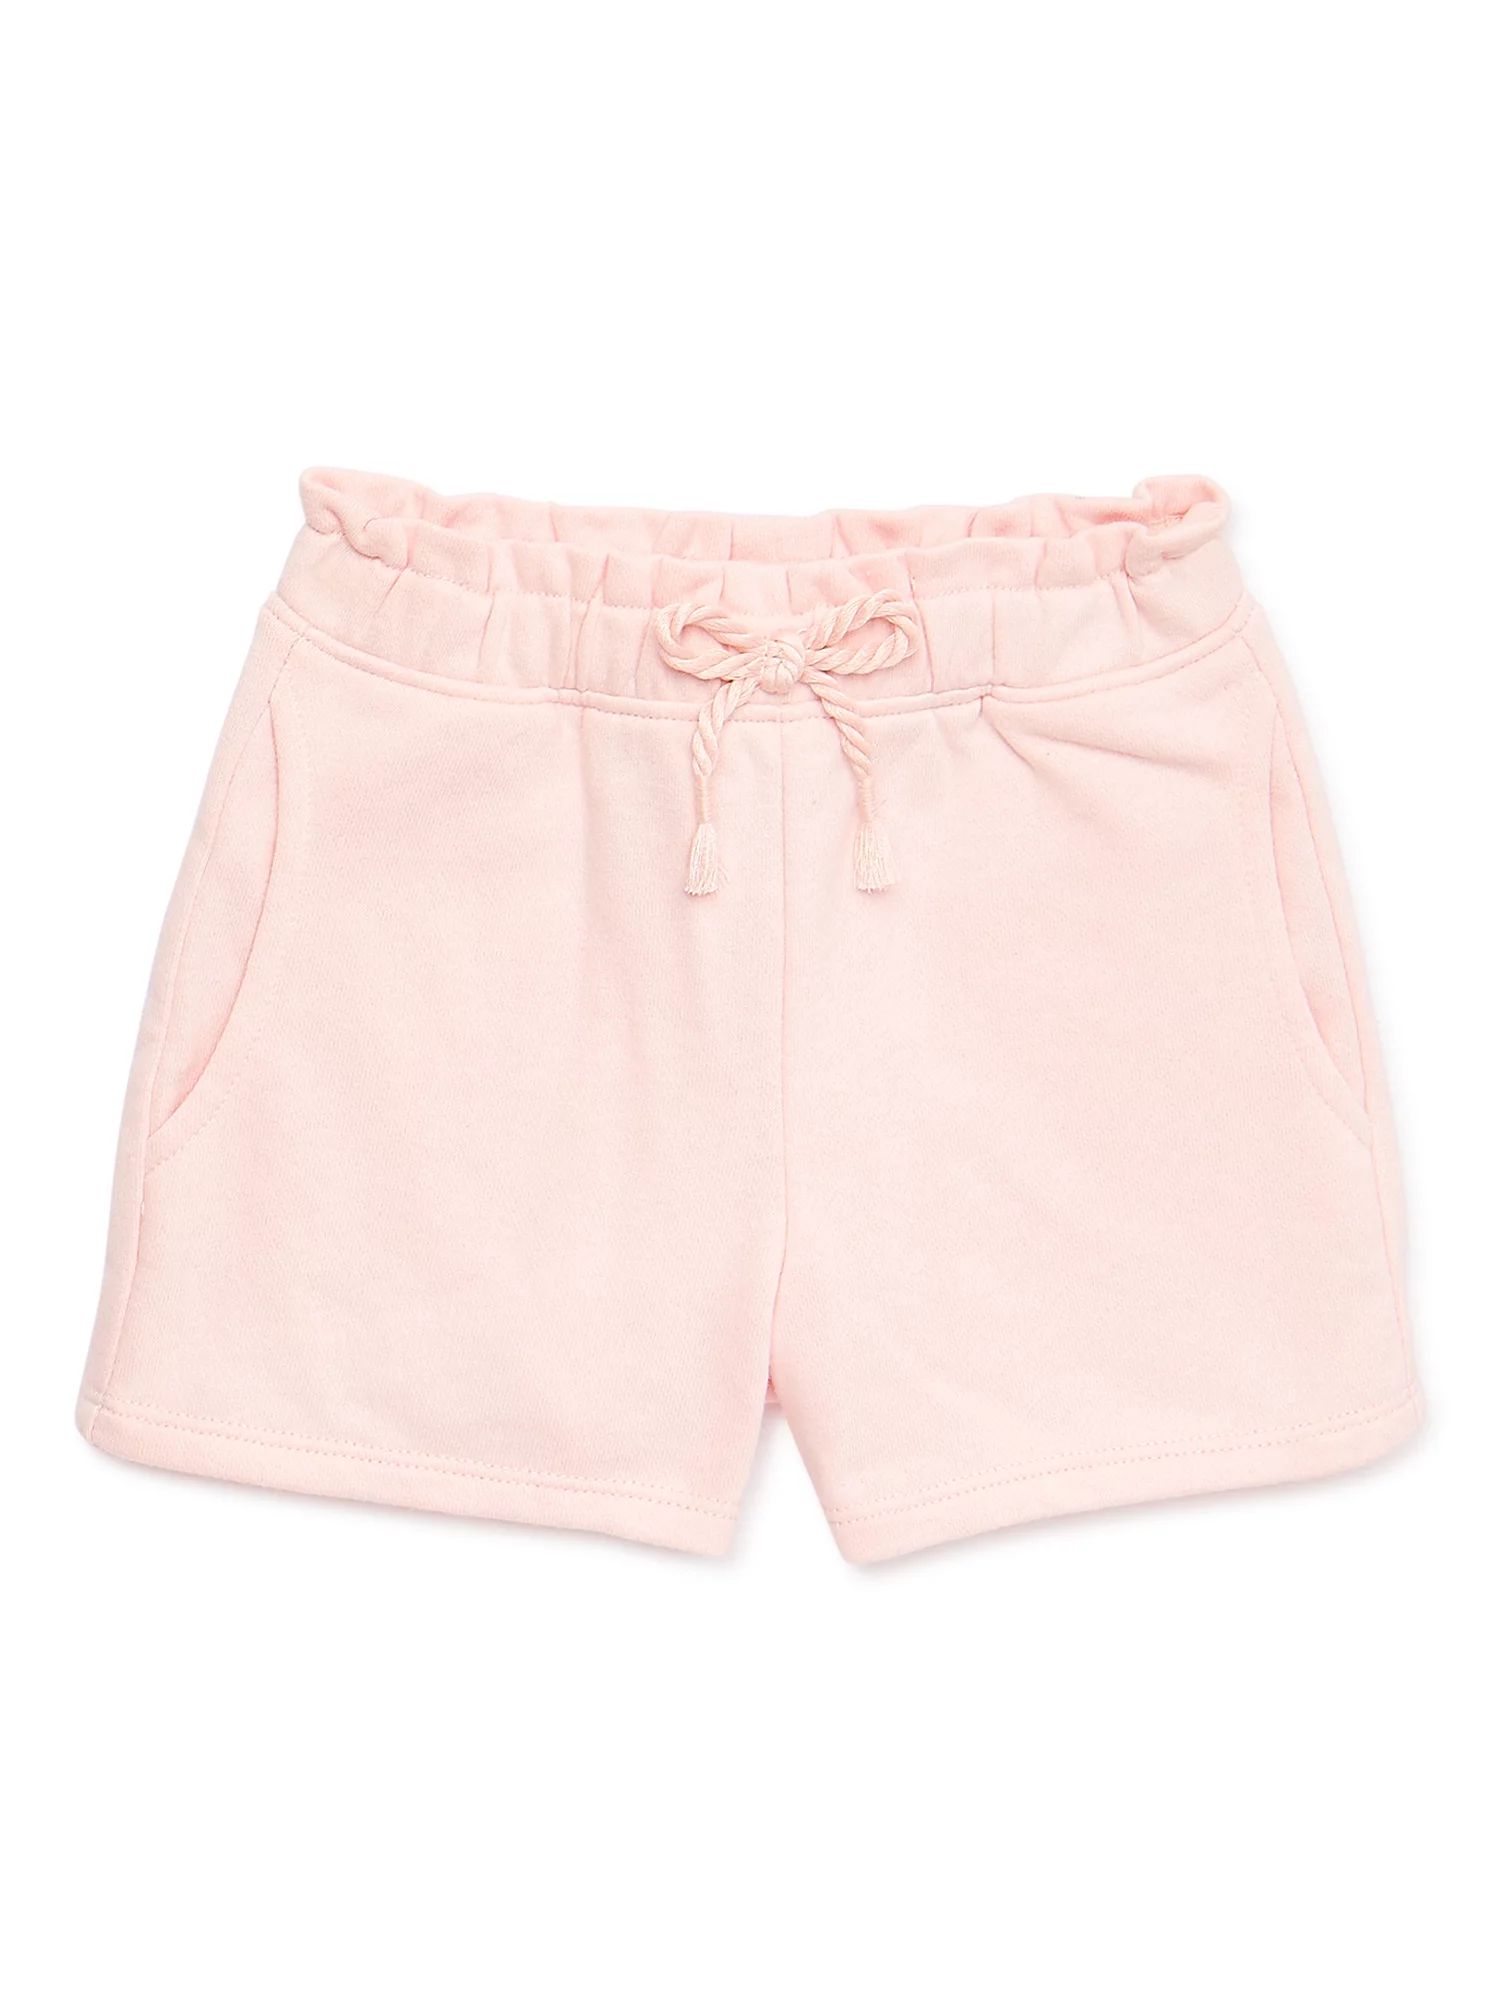 Garanimals Baby and Toddler Girls French Terry Cloth Shorts, Sizes 12M-5T | Walmart (US)